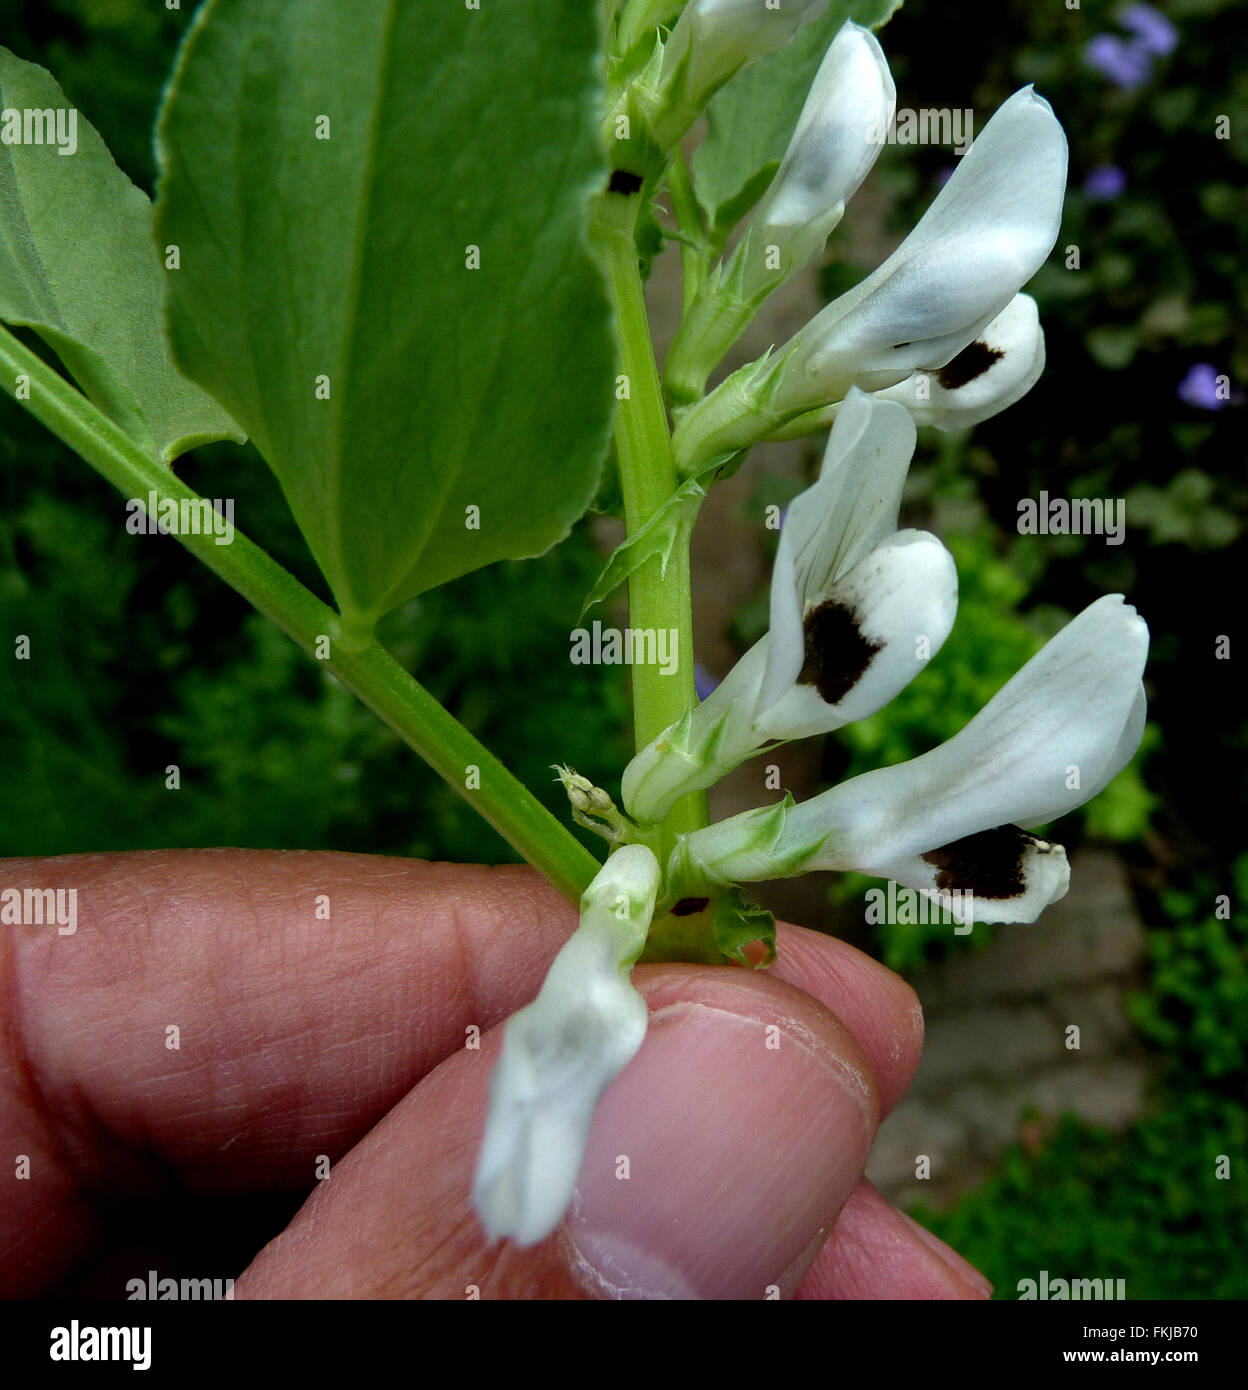 Broad bean, Fava bean,  Vicia faba, Fabaceae, cultivated herb, 1-4 pairs of leaflets, white flowers and turgid cylindrical pods Stock Photo